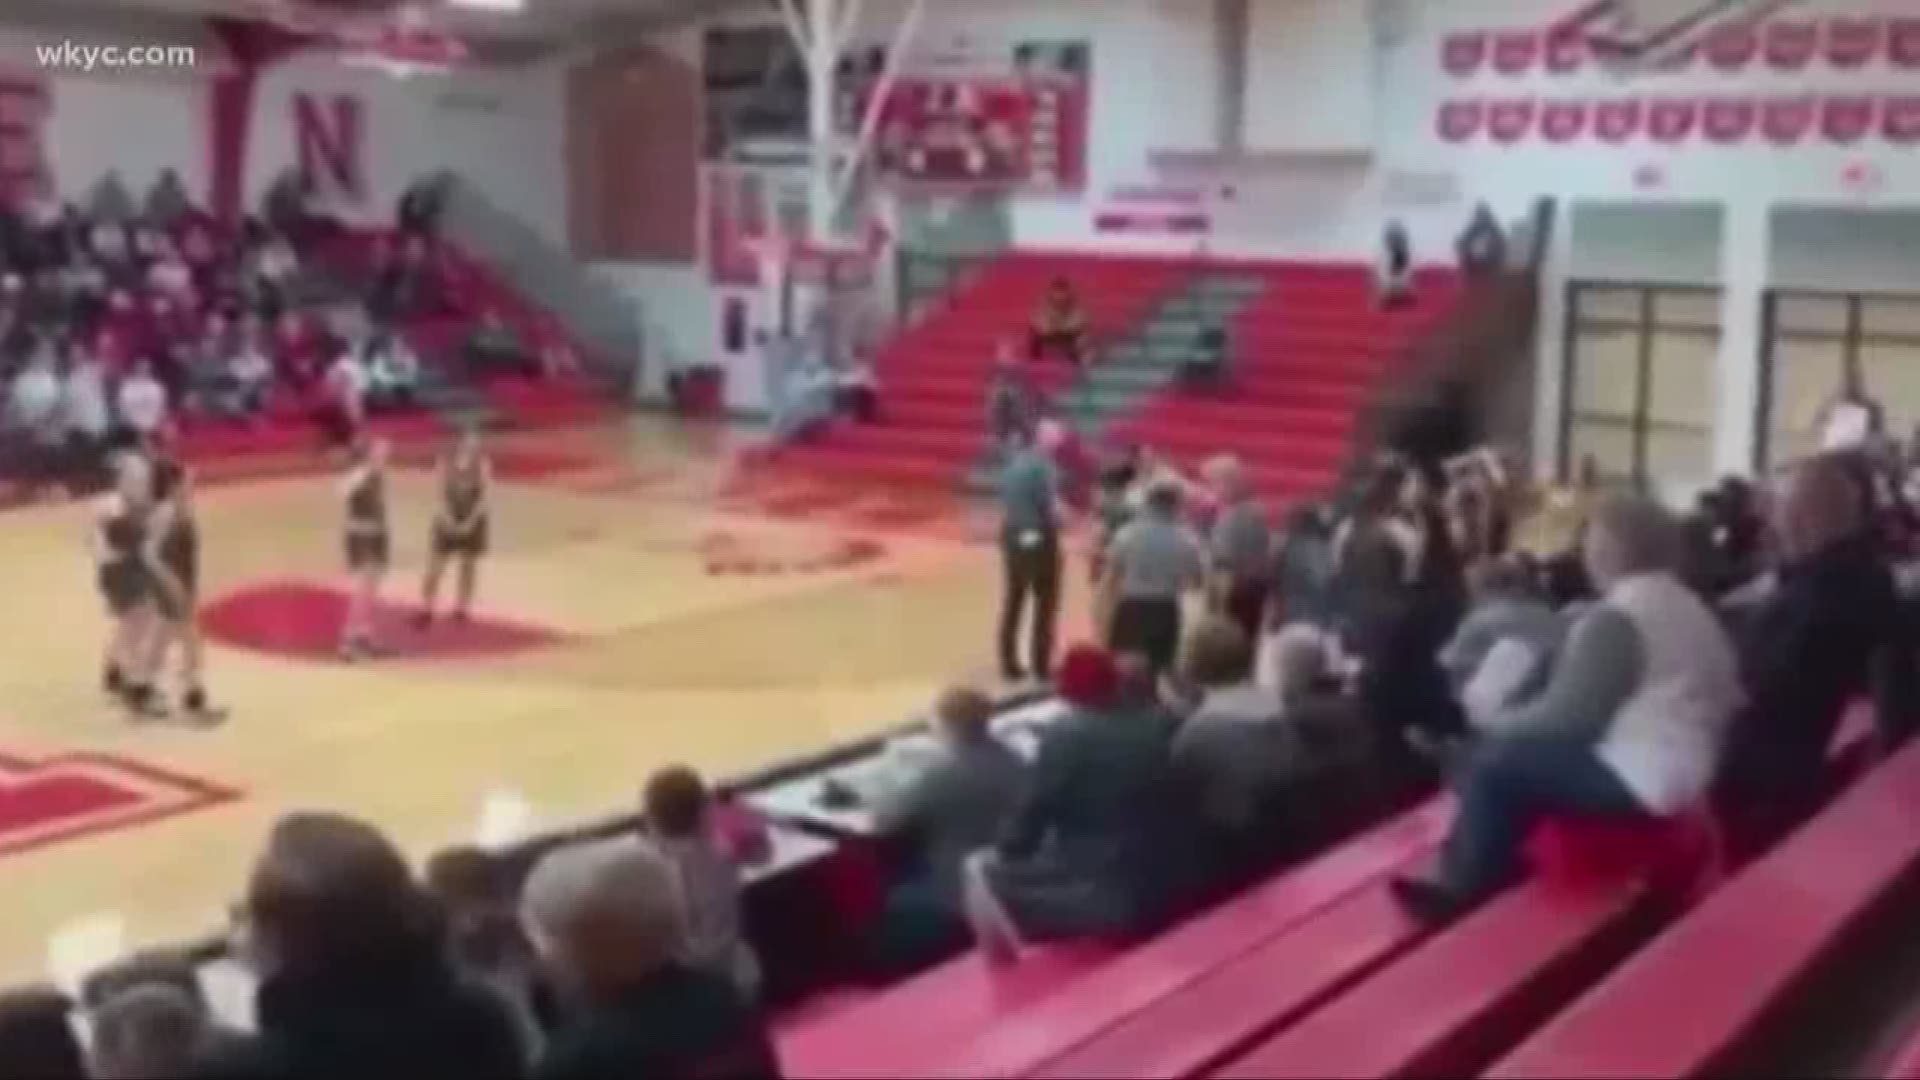 Athlete caught pulling opponents hair during basketball game has been punished